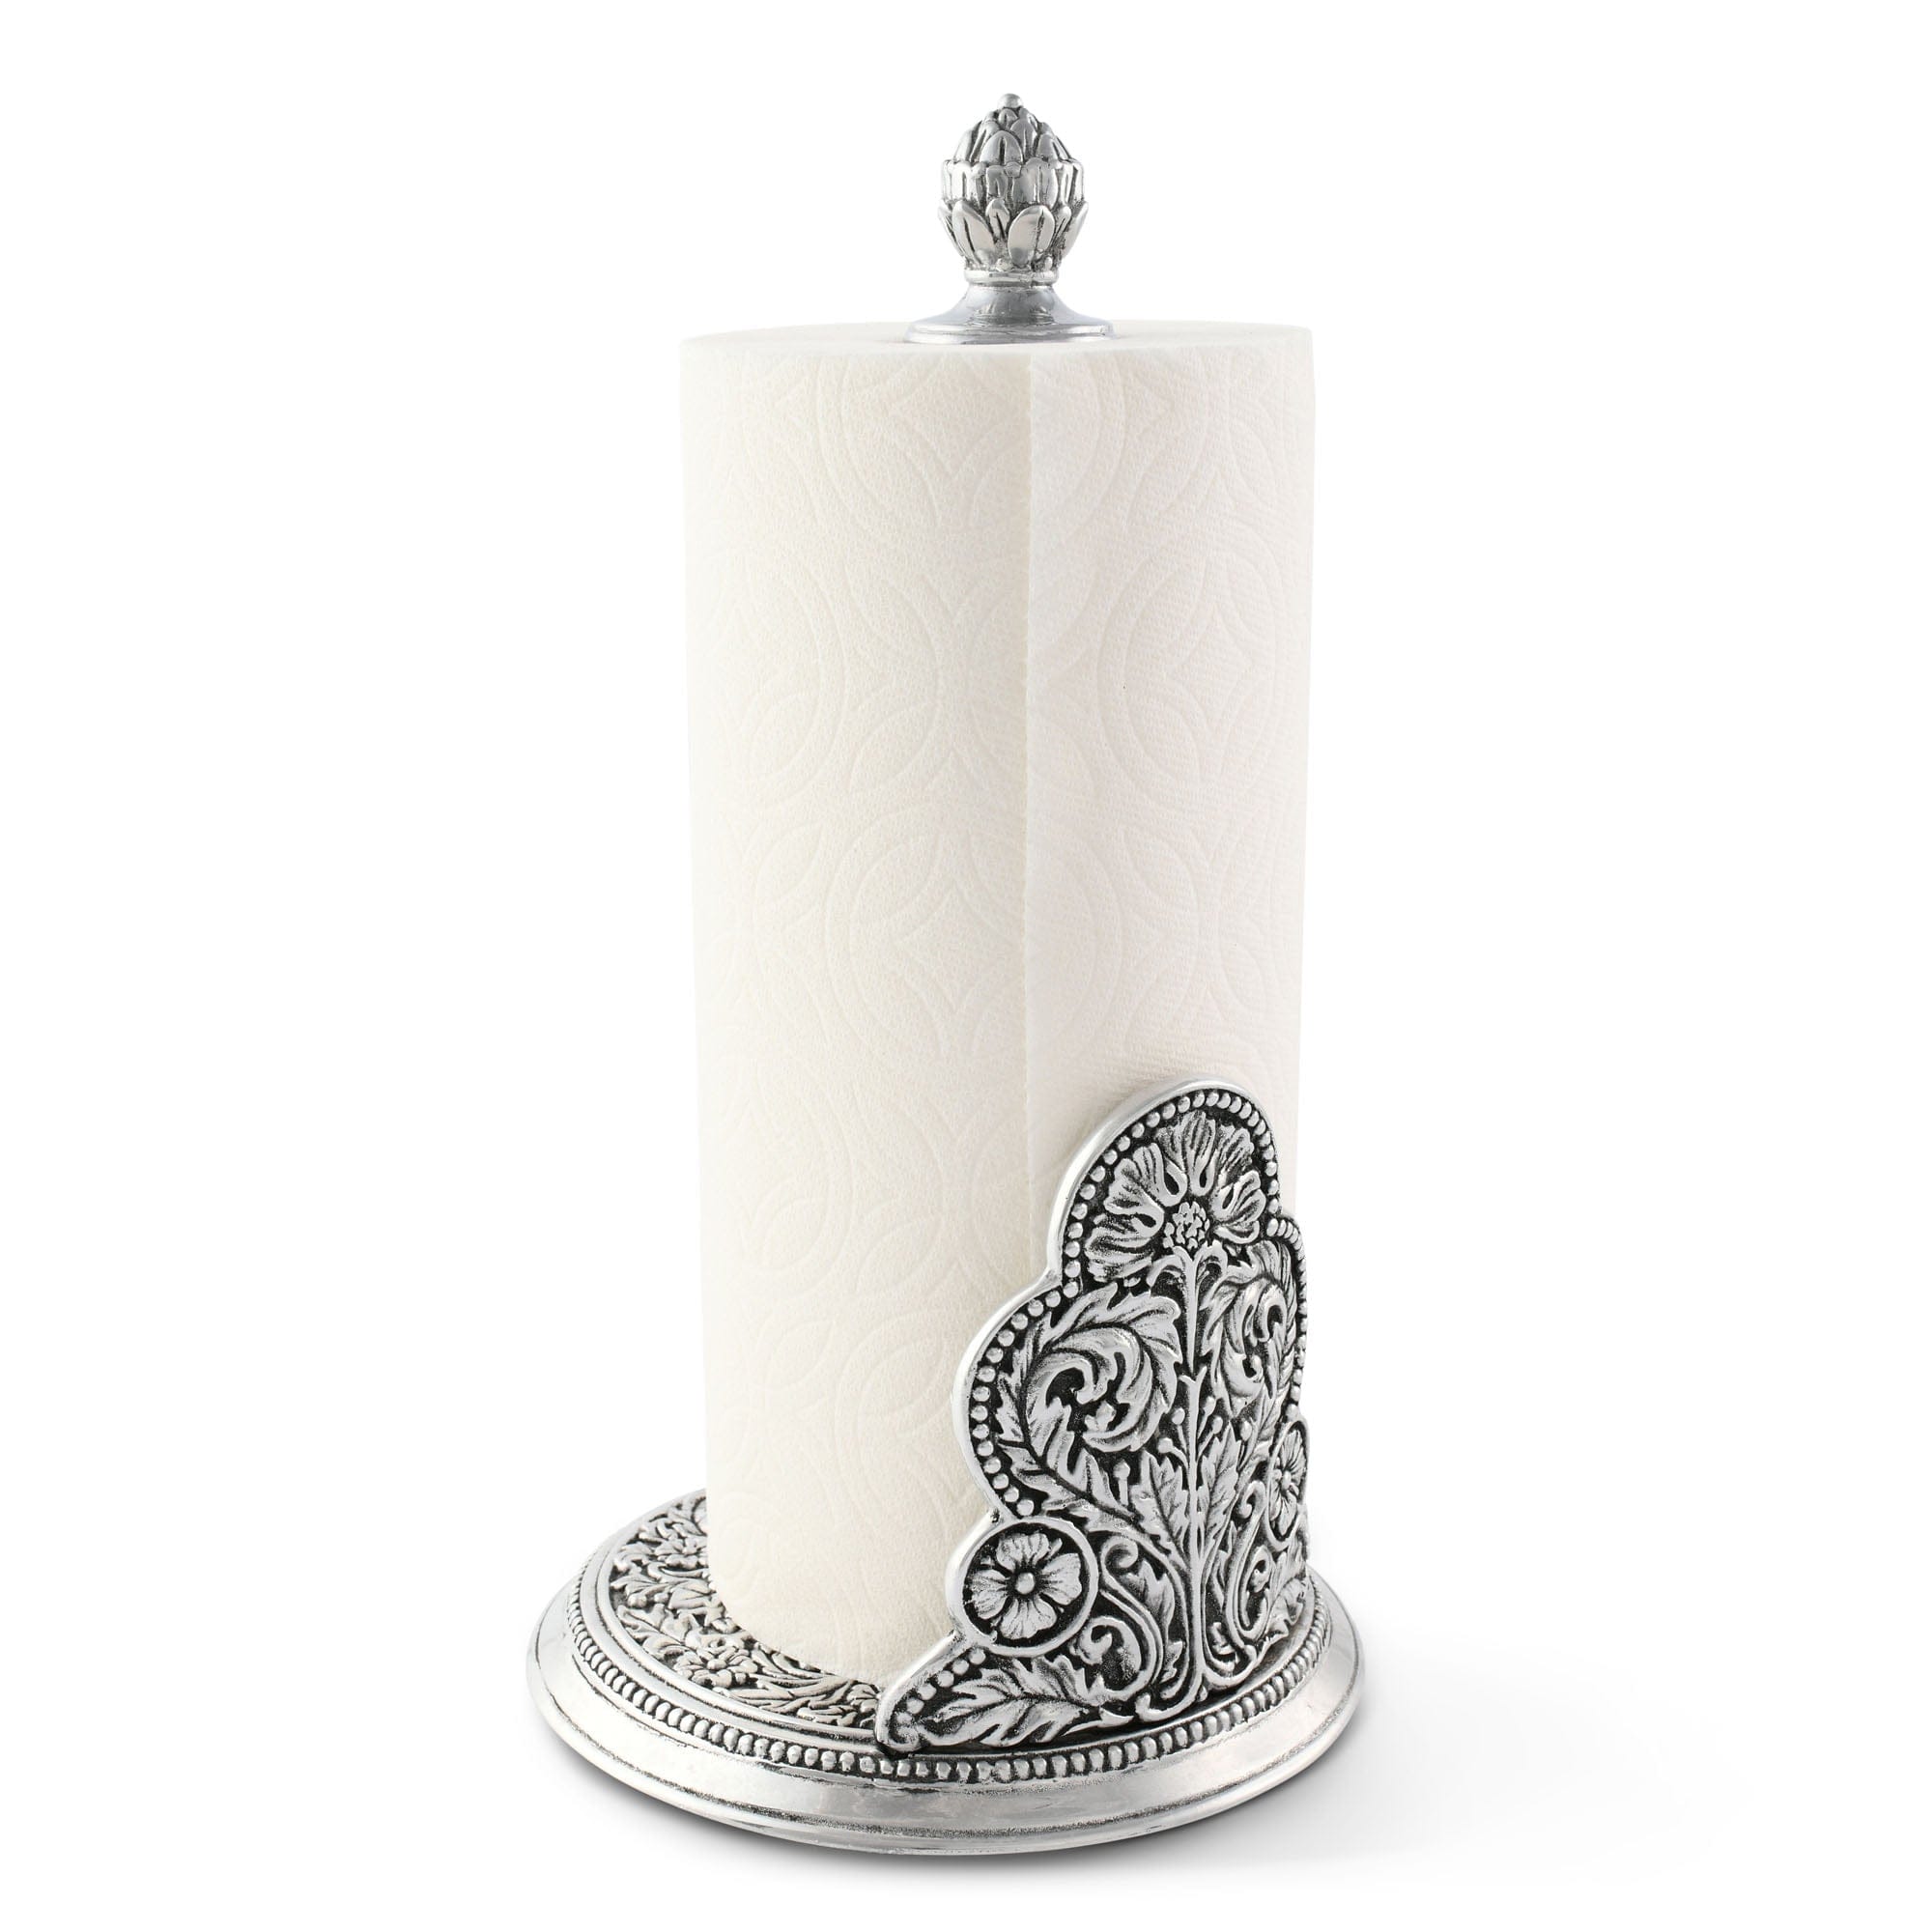 Arte Italica Peltro French Silver Pewter Paper Towel Holder